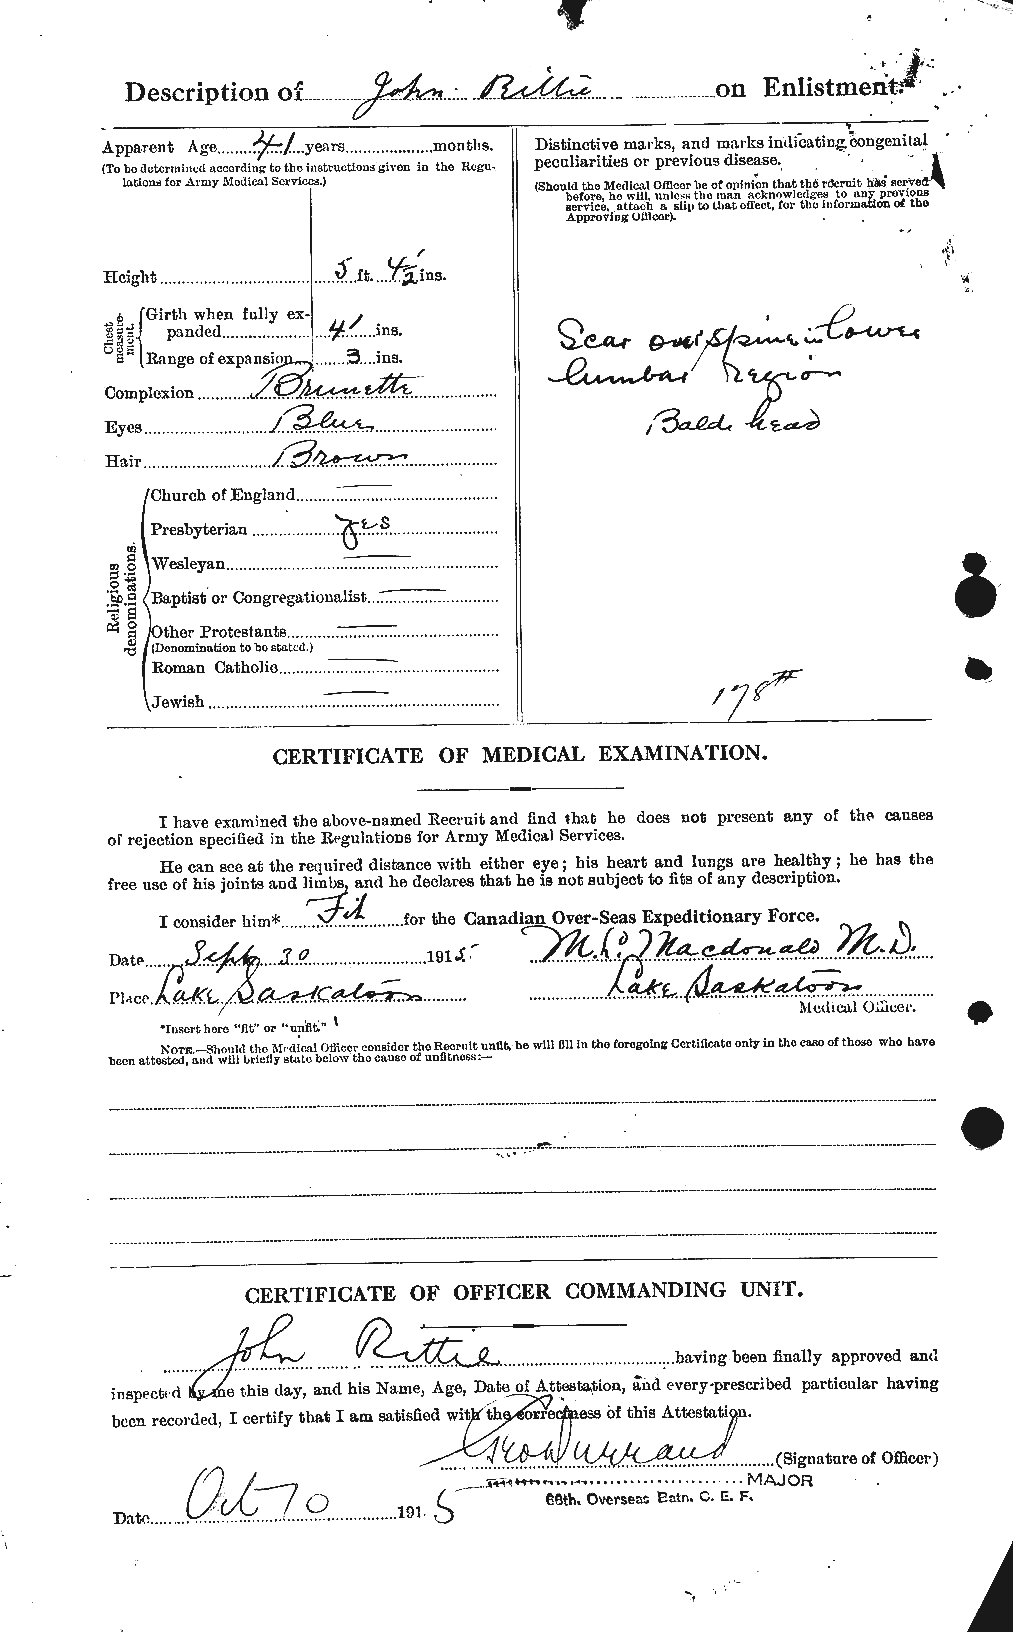 Personnel Records of the First World War - CEF 605460b